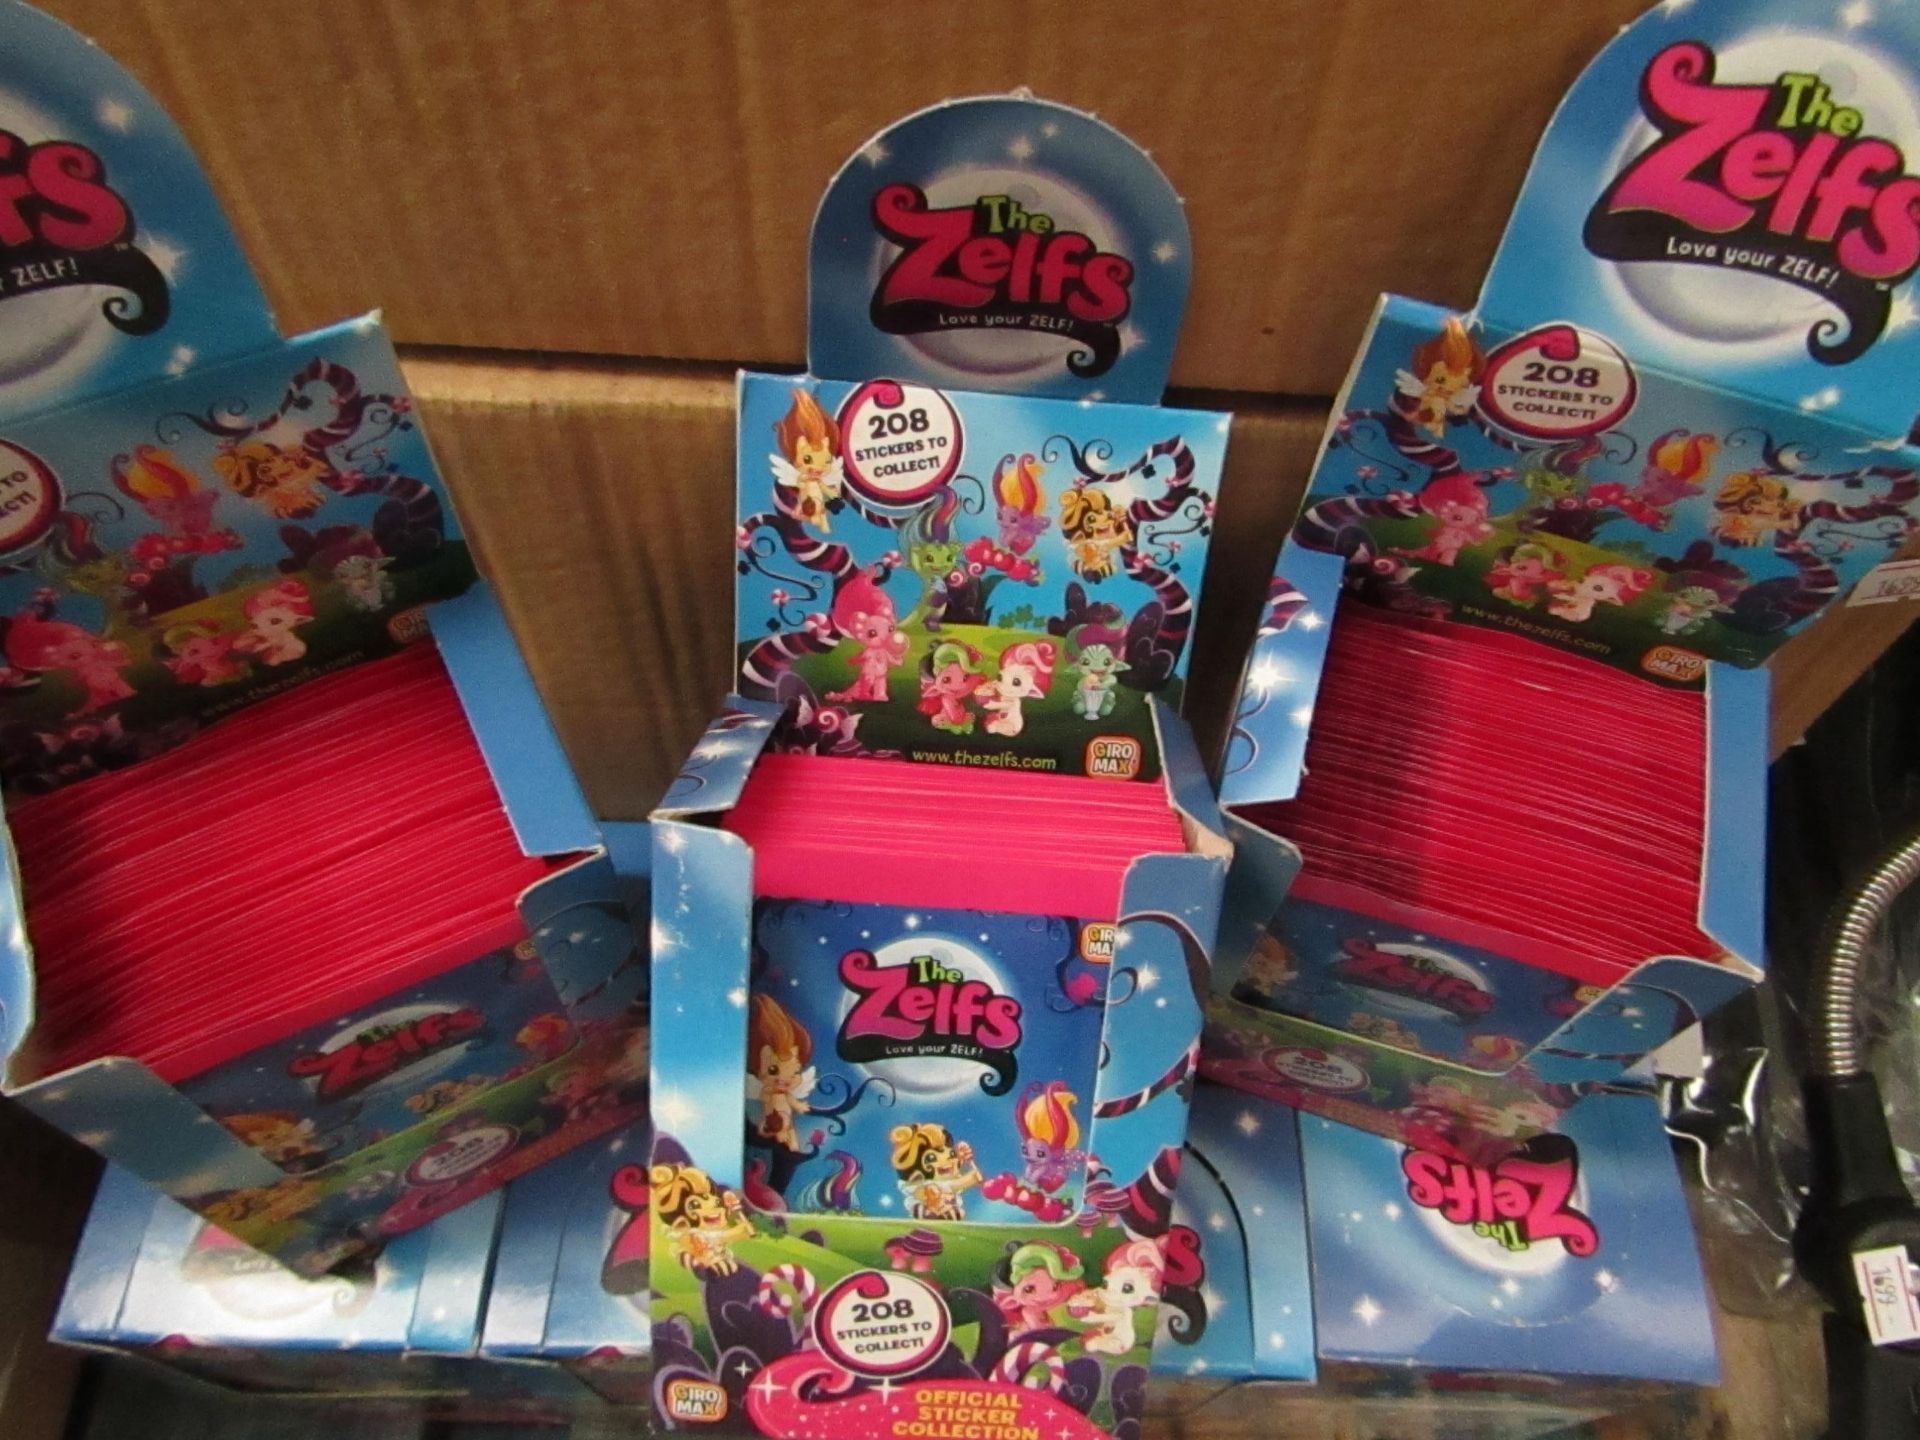 12x Boxes Containing 50 Units Per Box Being: The Zelfs - Official Sticker Collection - Unused &